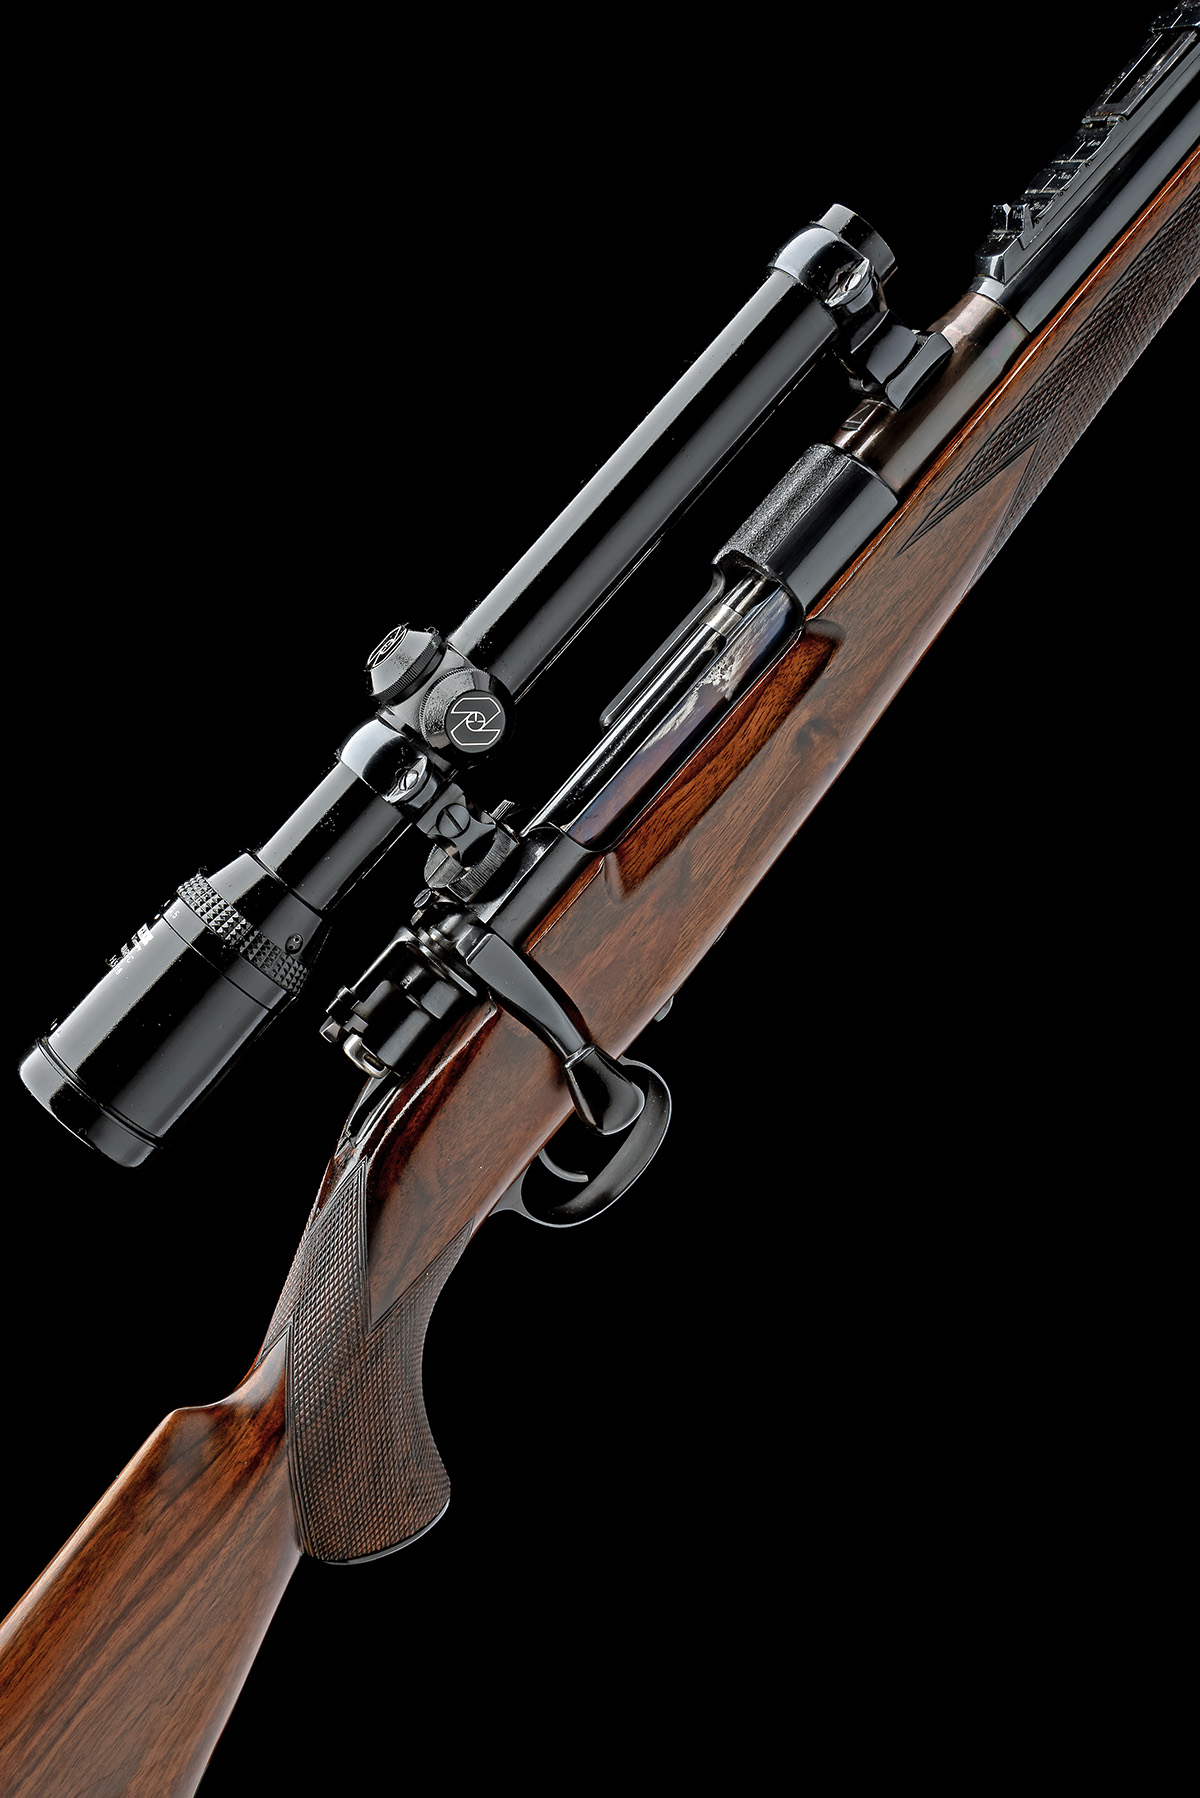 WESTLEY RICHARDS & CO. A .318 ACCELERATED EXPRESS BOLT-MAGAZINE SPORTING RIFLE, serial no. LT.